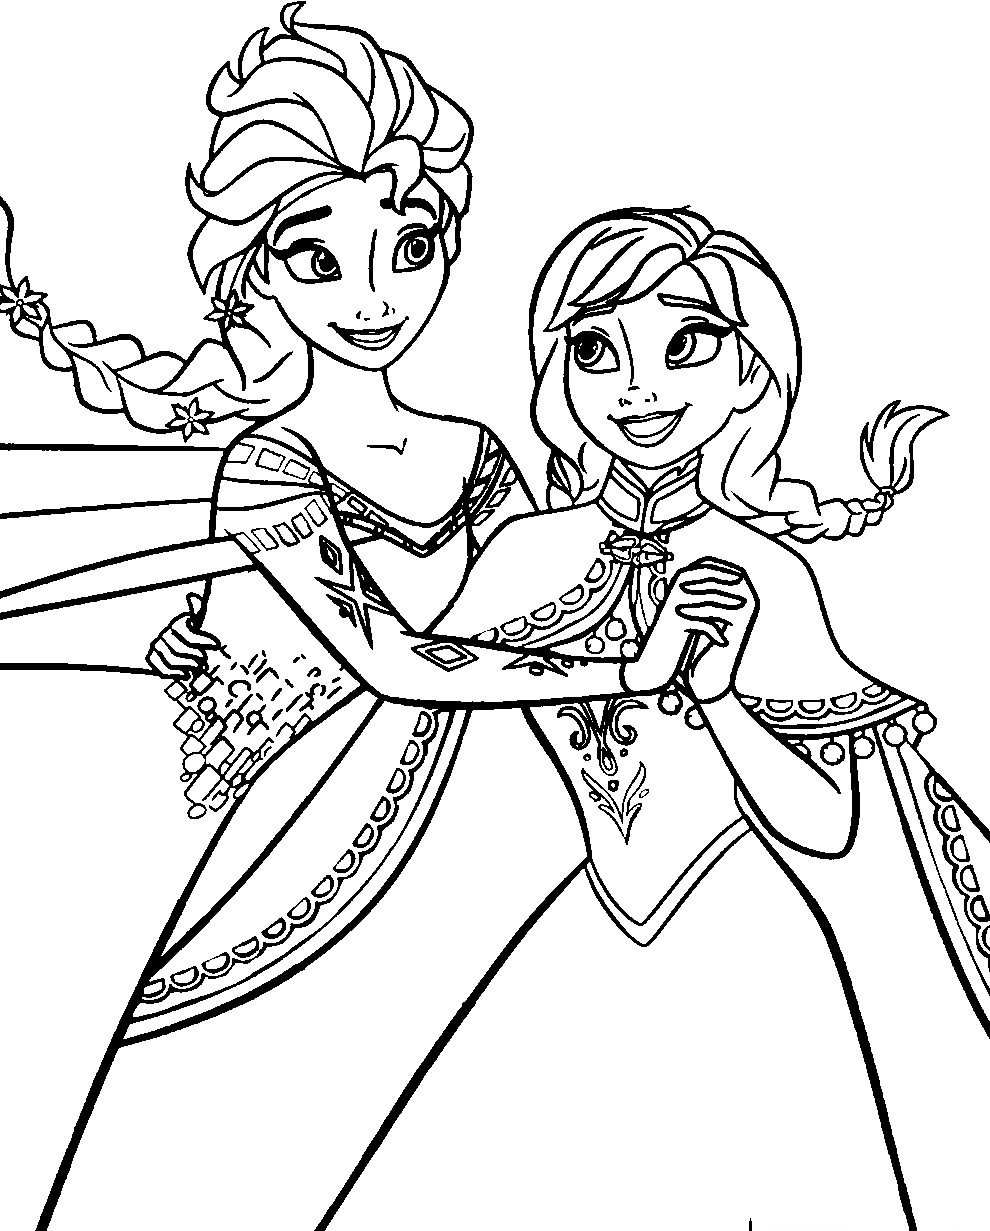 Free Elsa Coloring Pages
 Disney Frozen Coloring Pages To Download